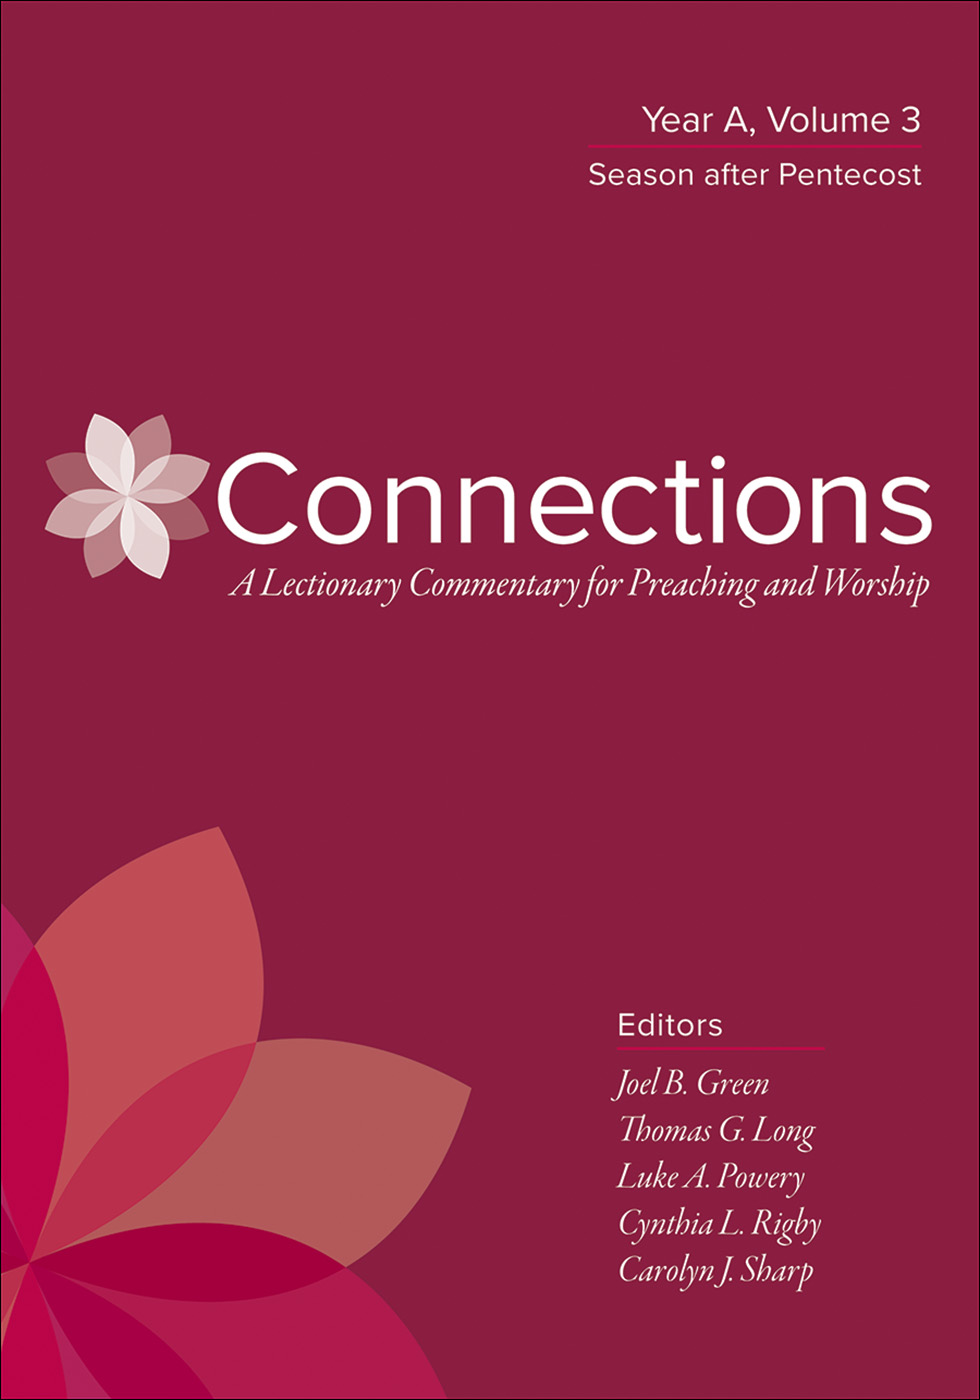 Connections: Year A, Volume 3